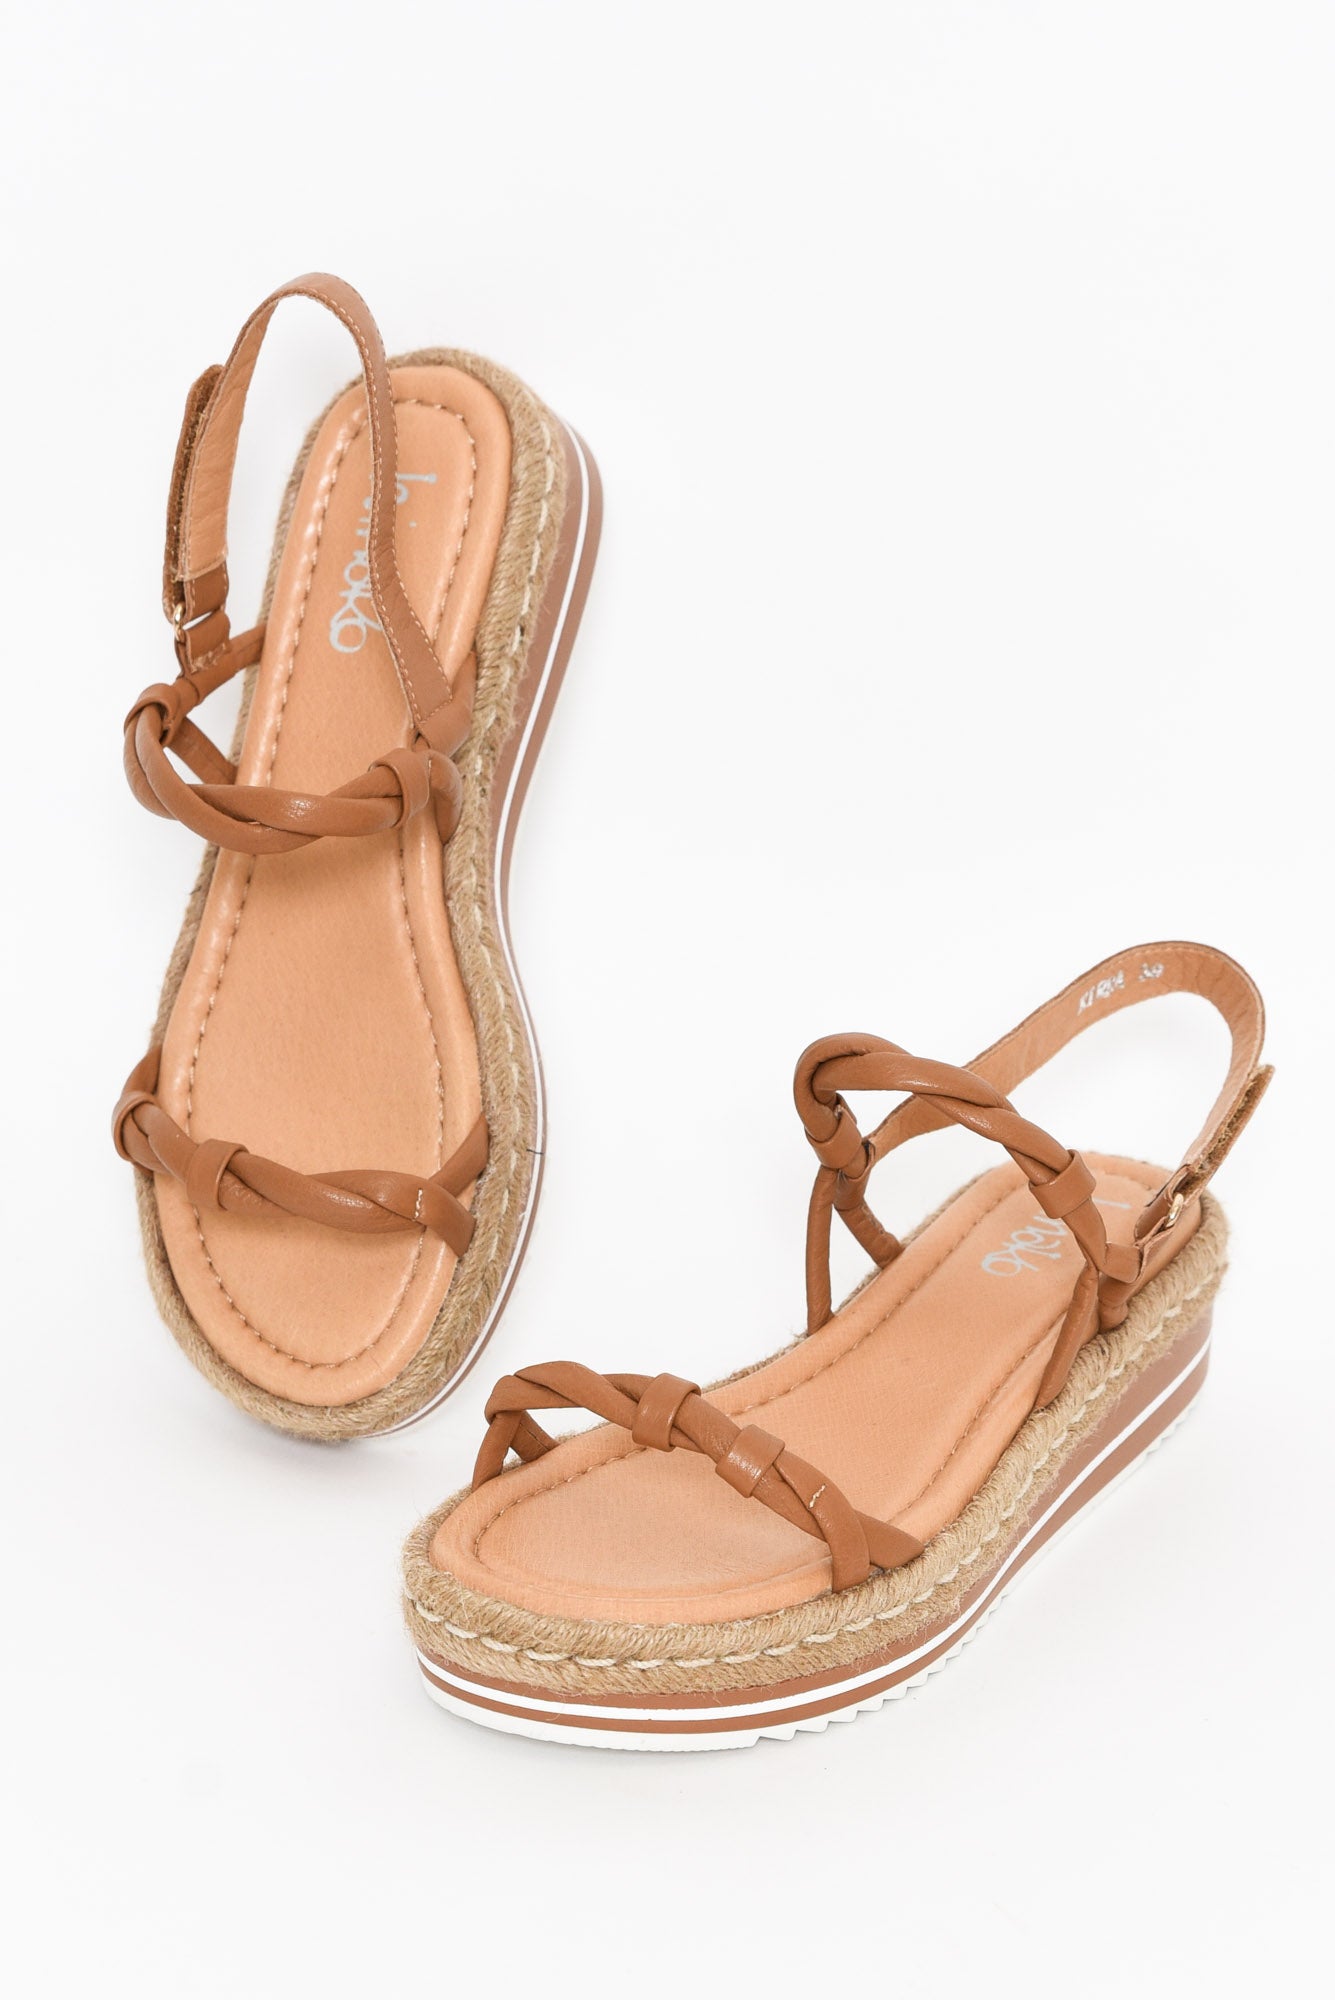 French Connection chunky cork style platform sandals in tan | ASOS